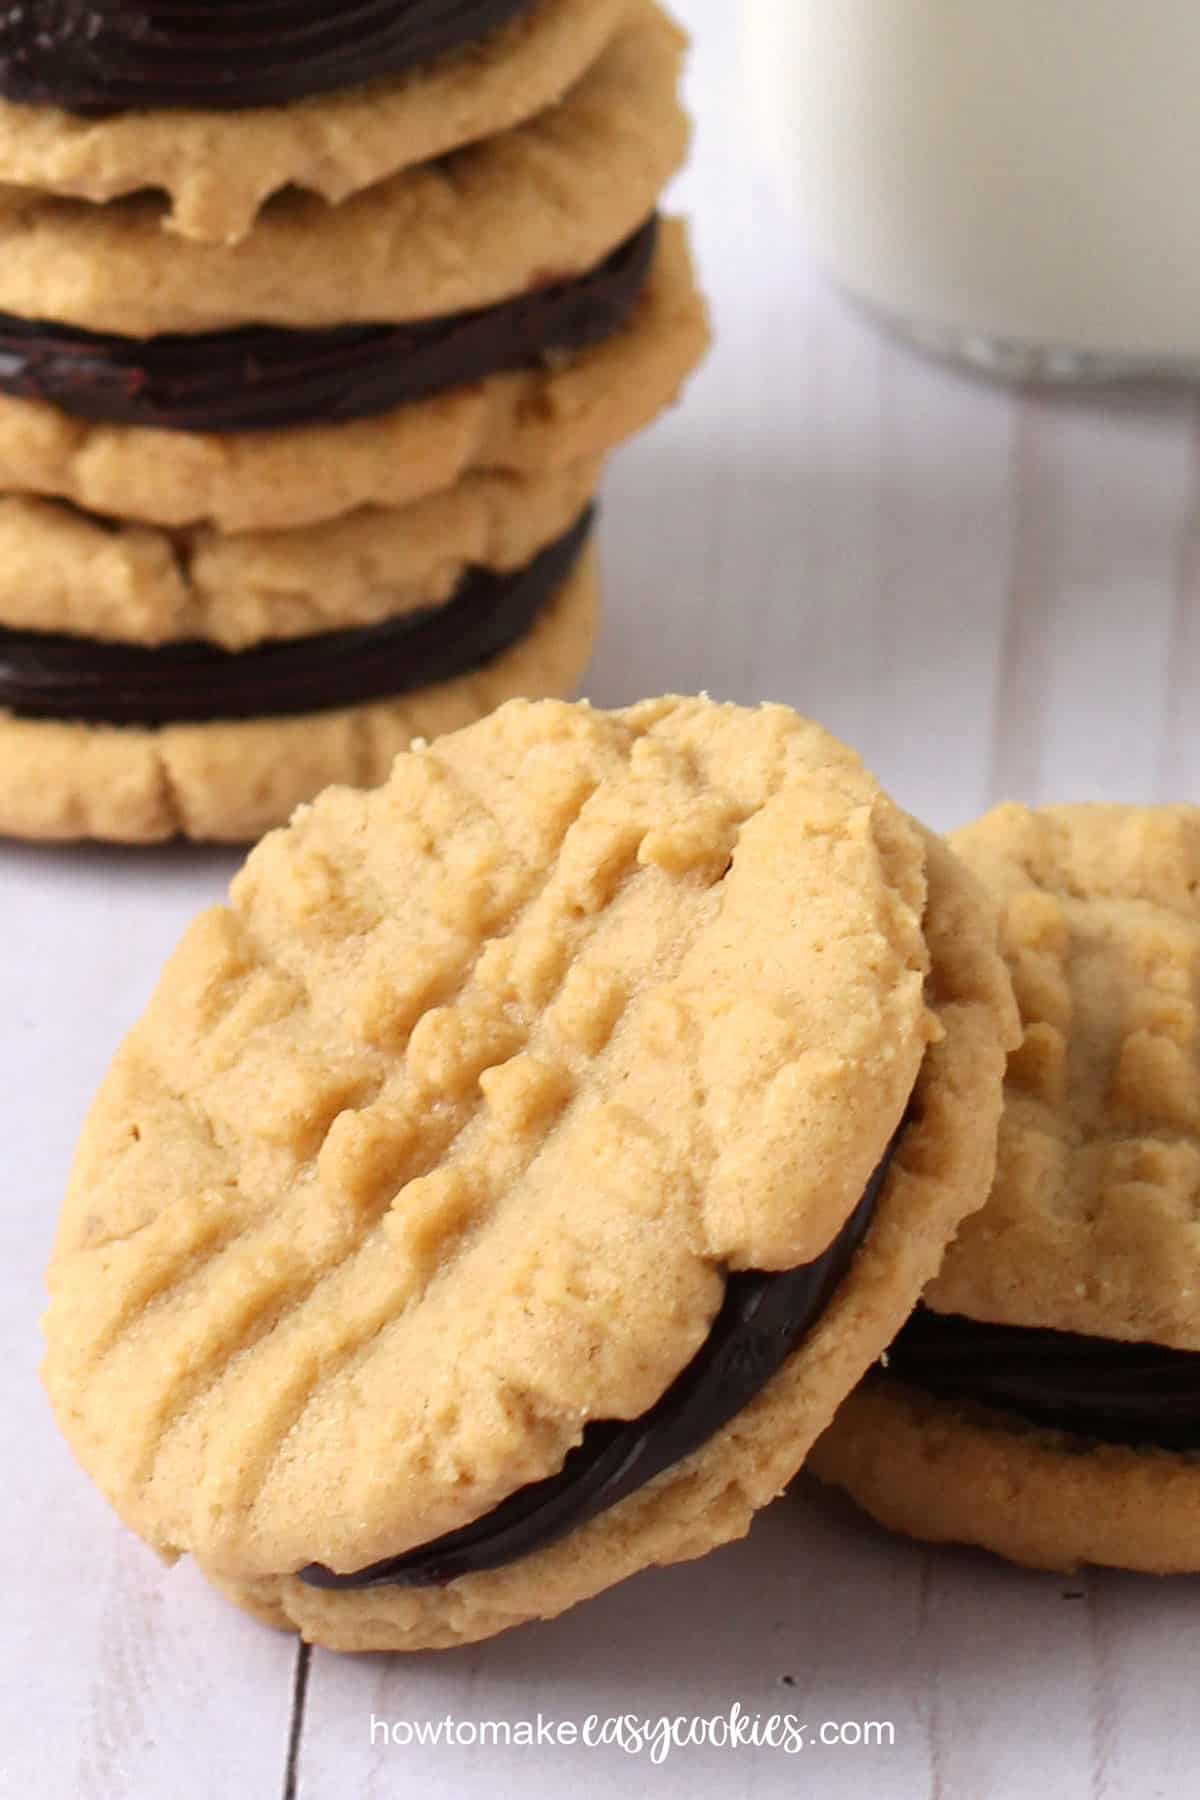 Peanut butter sandwich cookies filled with chocolate ganache.